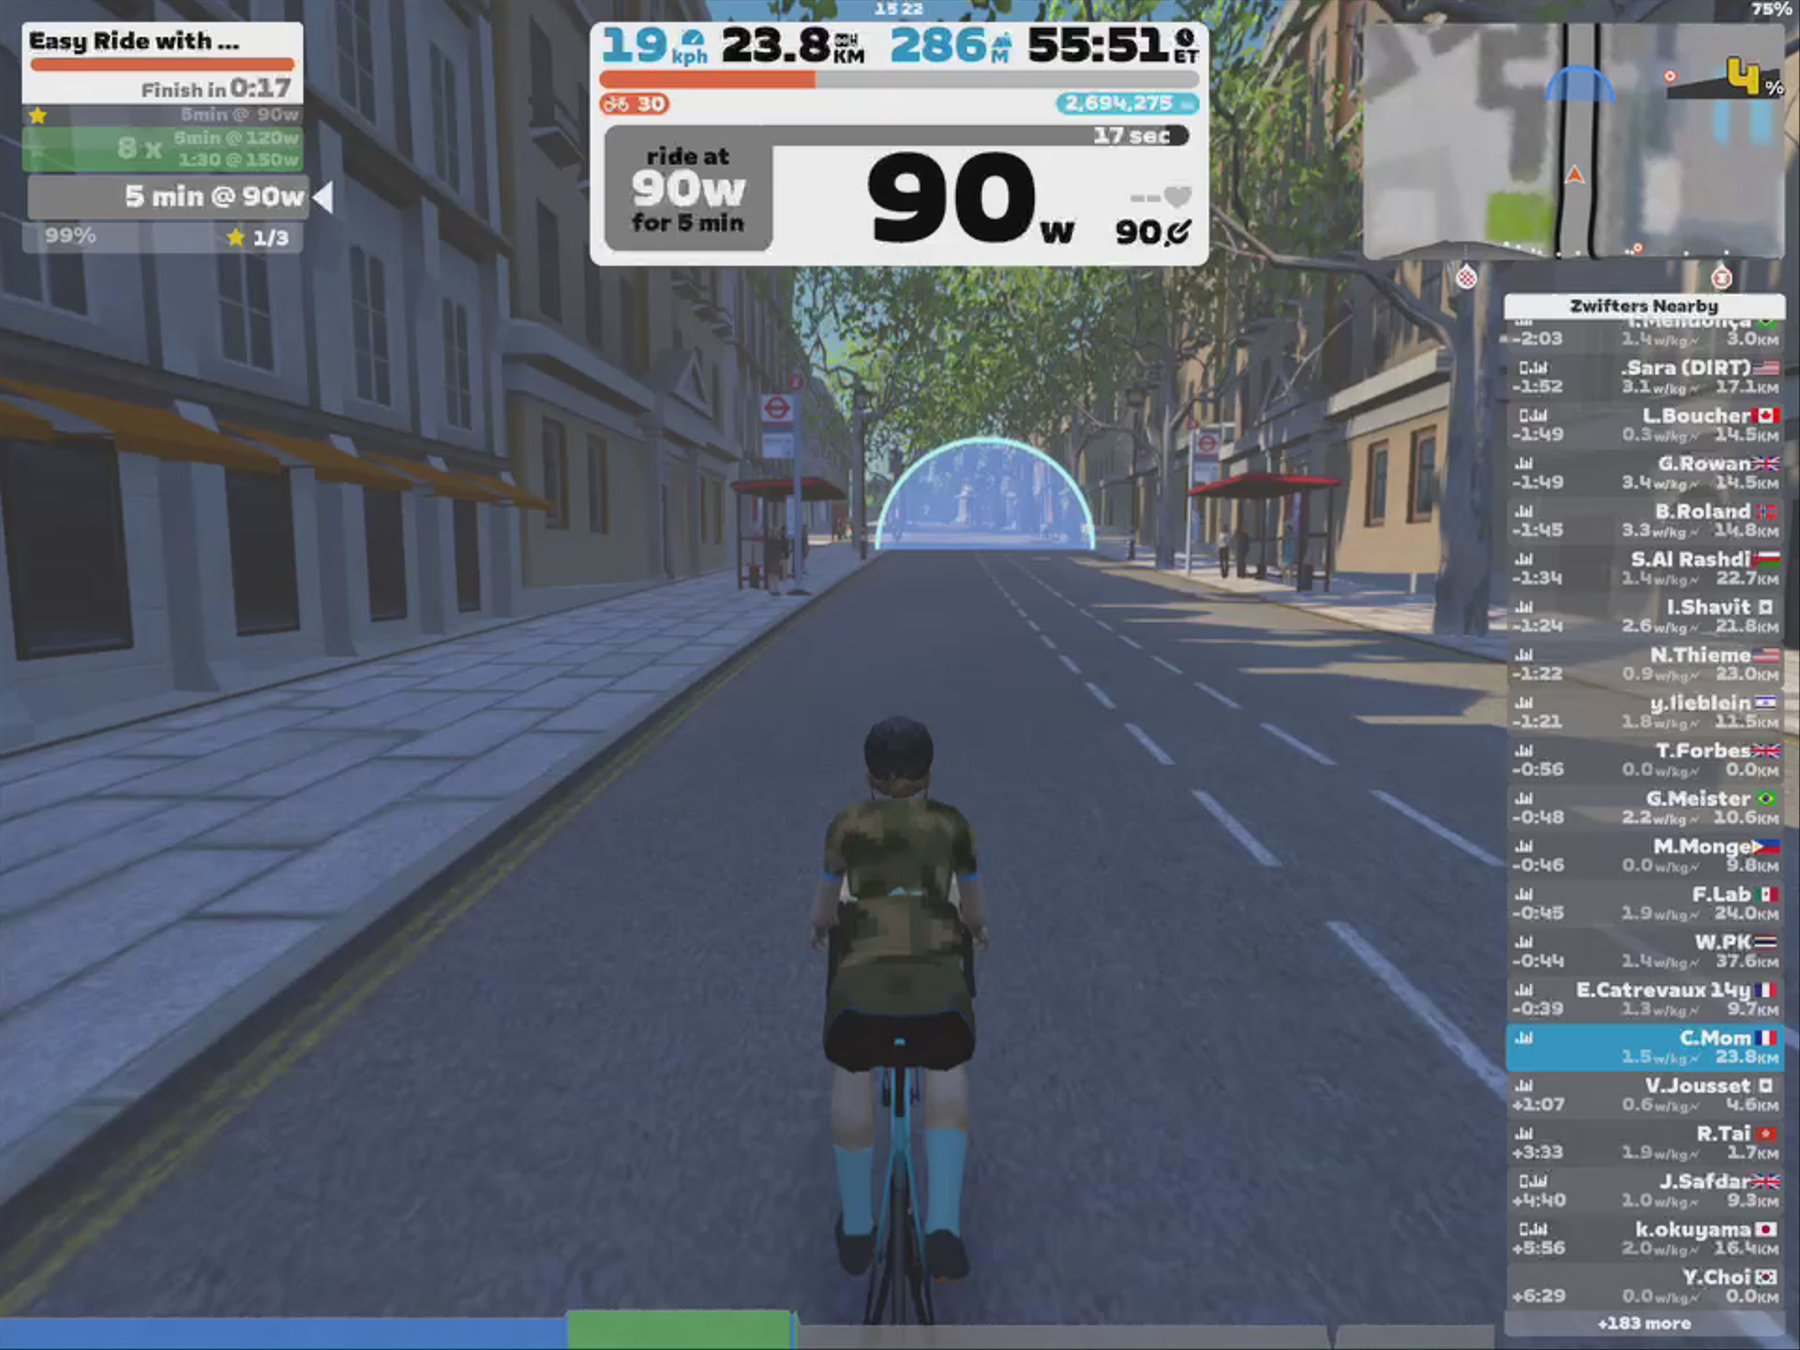 Zwift - Easy Ride with 1.5min Tempo spikes in London